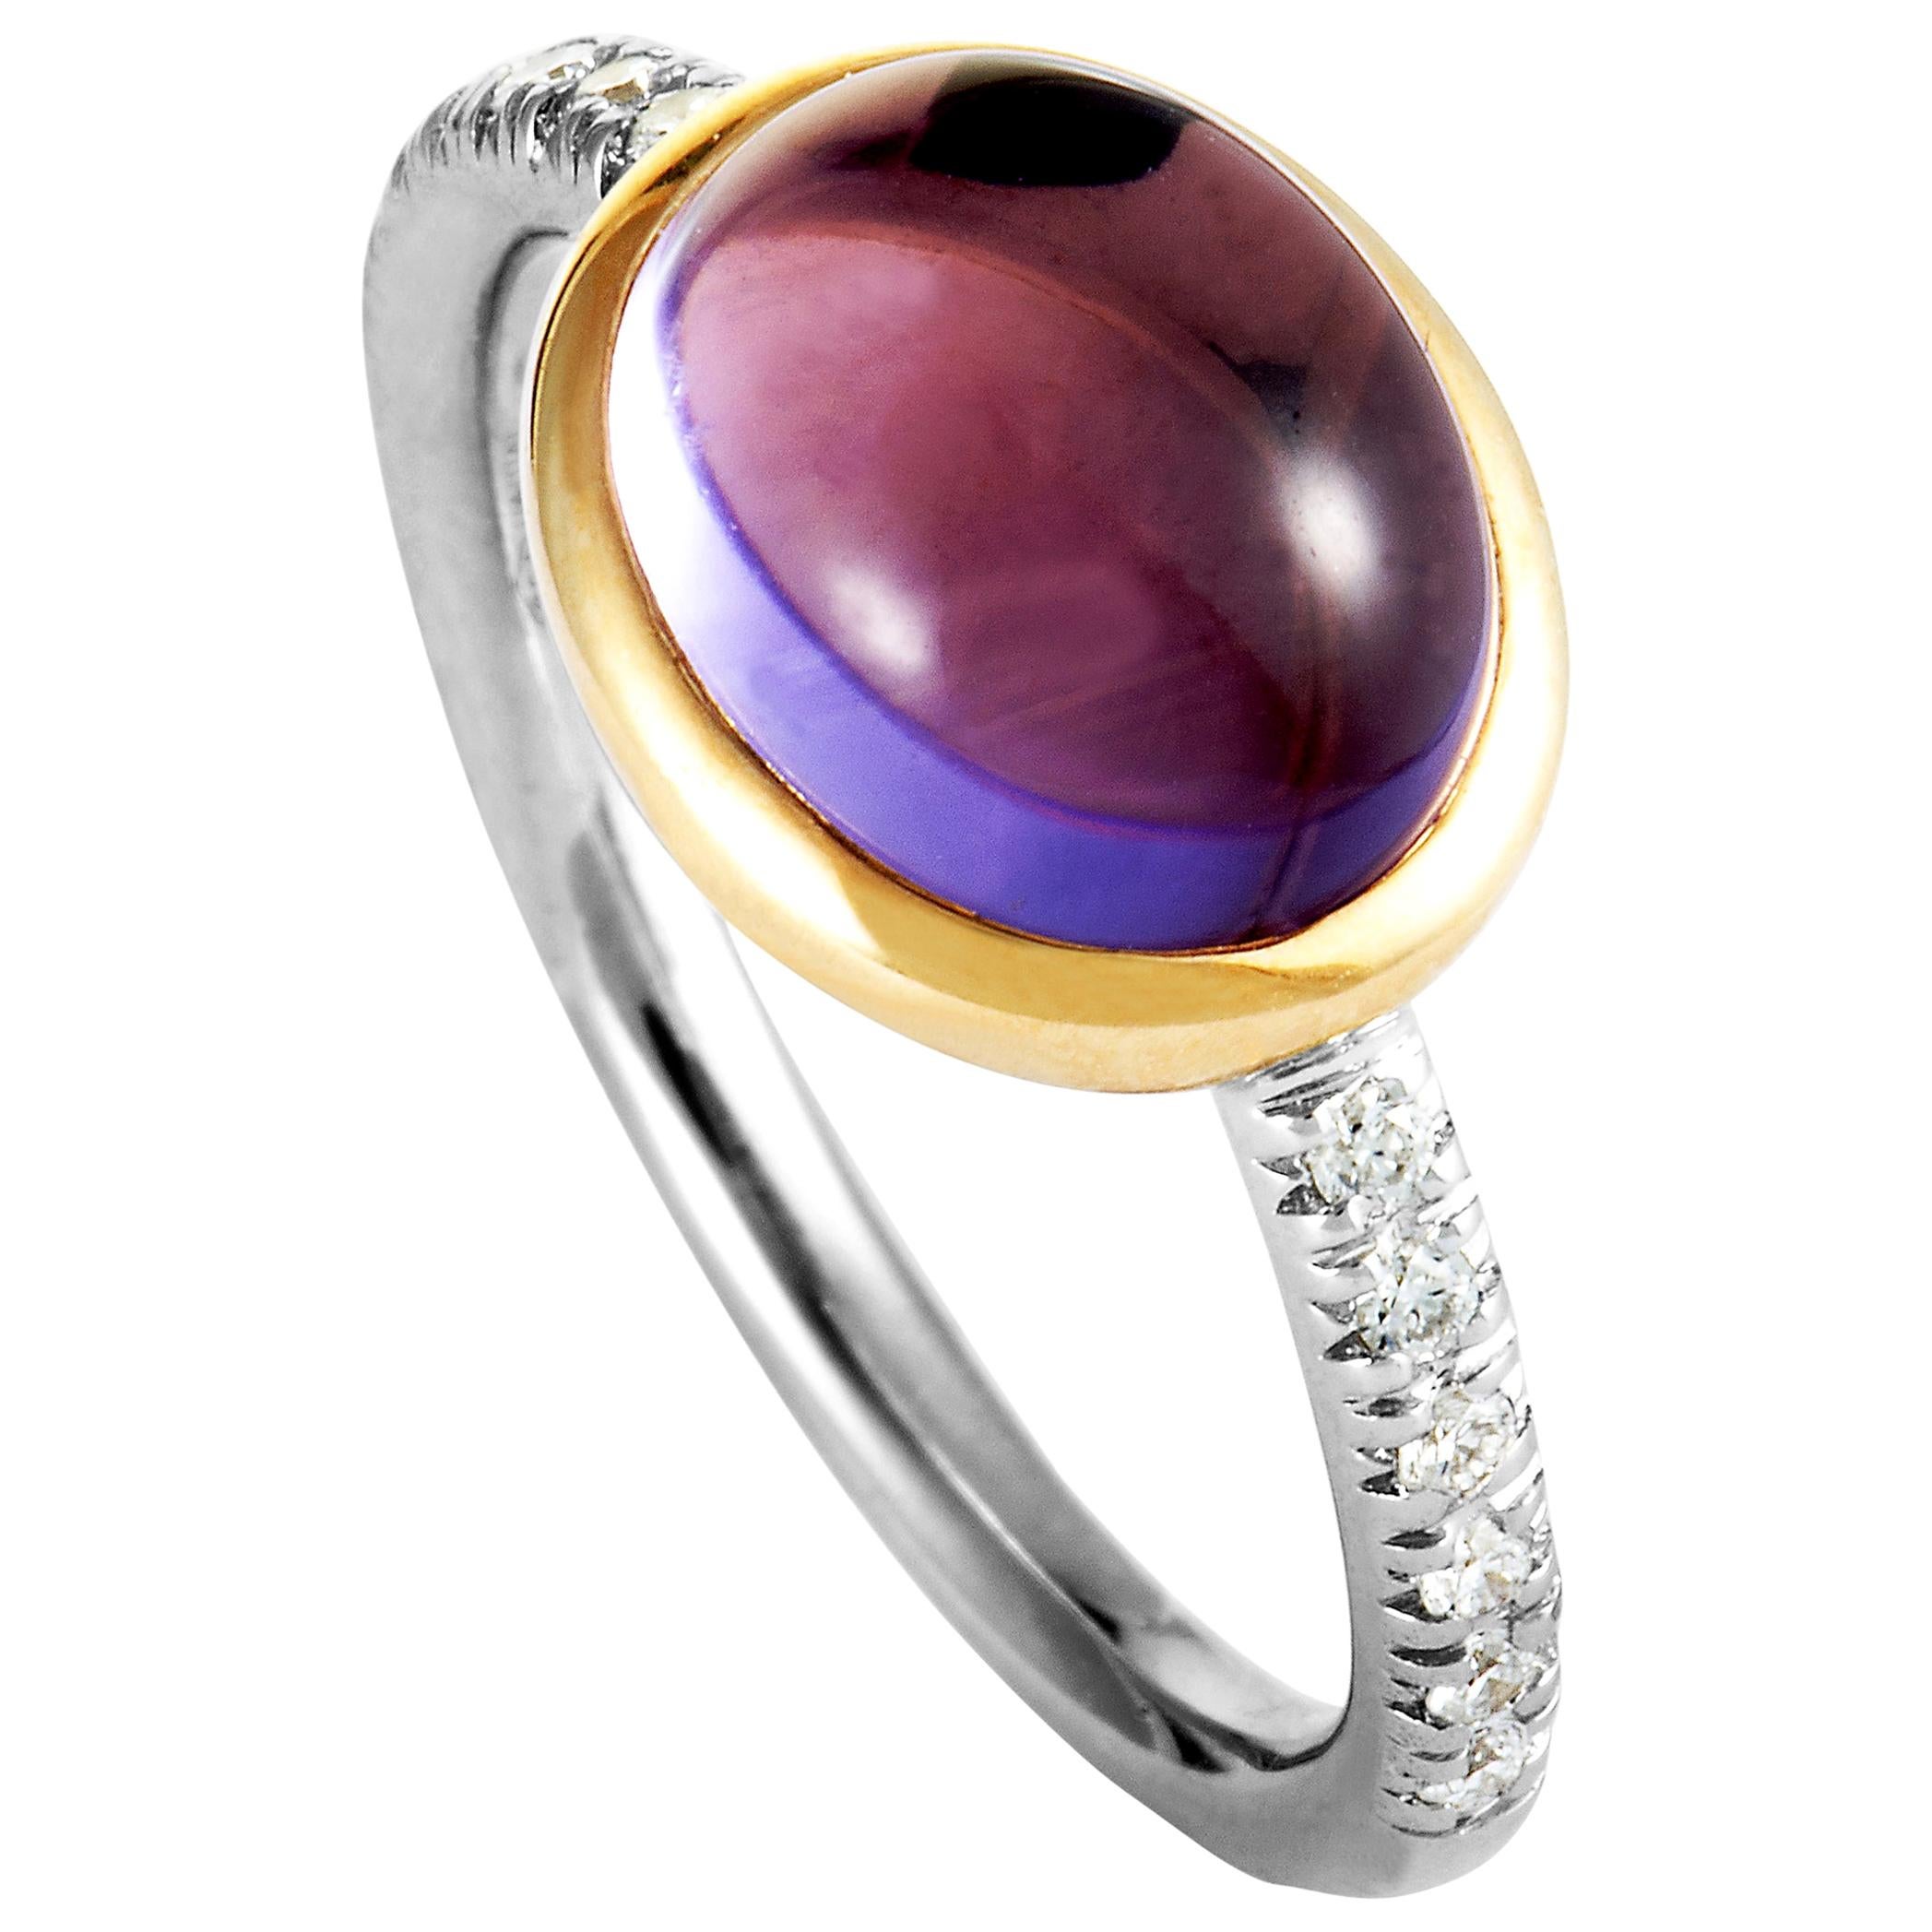 MIMÍ 18 Karat Rose and White Gold Diamond and Amethyst Ring